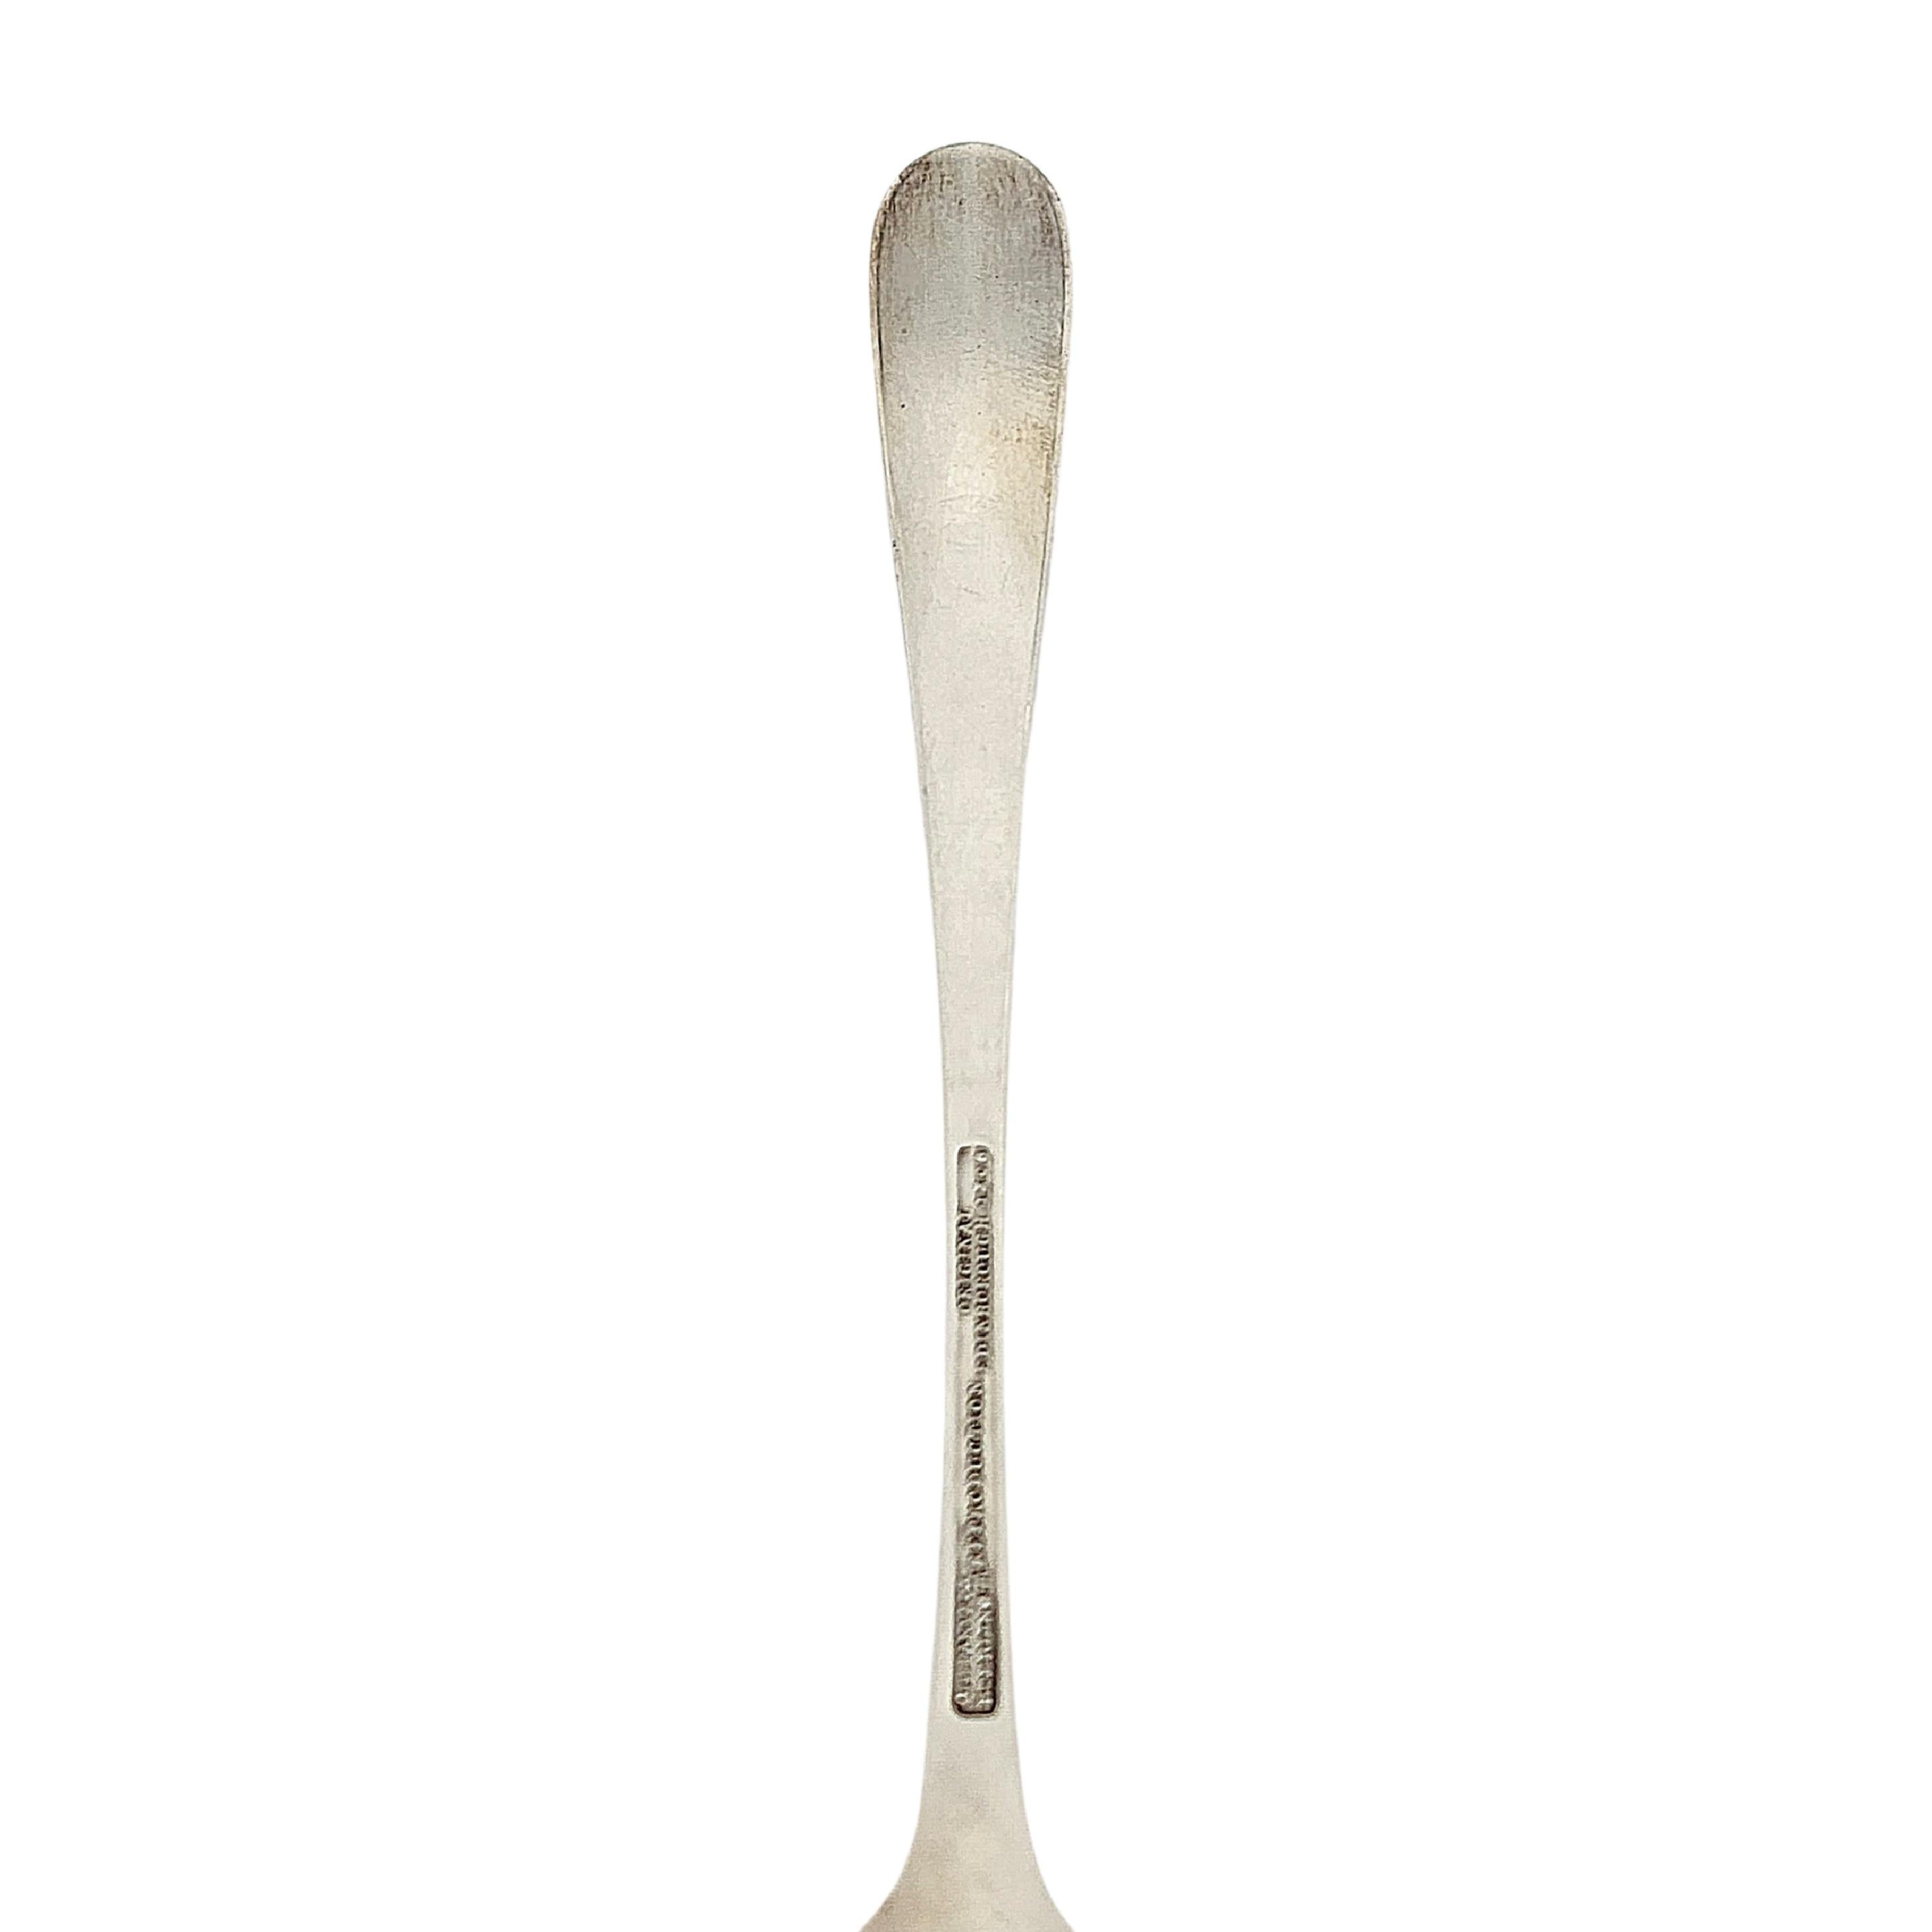 Tiffany & Co Sterling Silver Reproduction Edinborourgh Ladle (B) #13641 For Sale 2